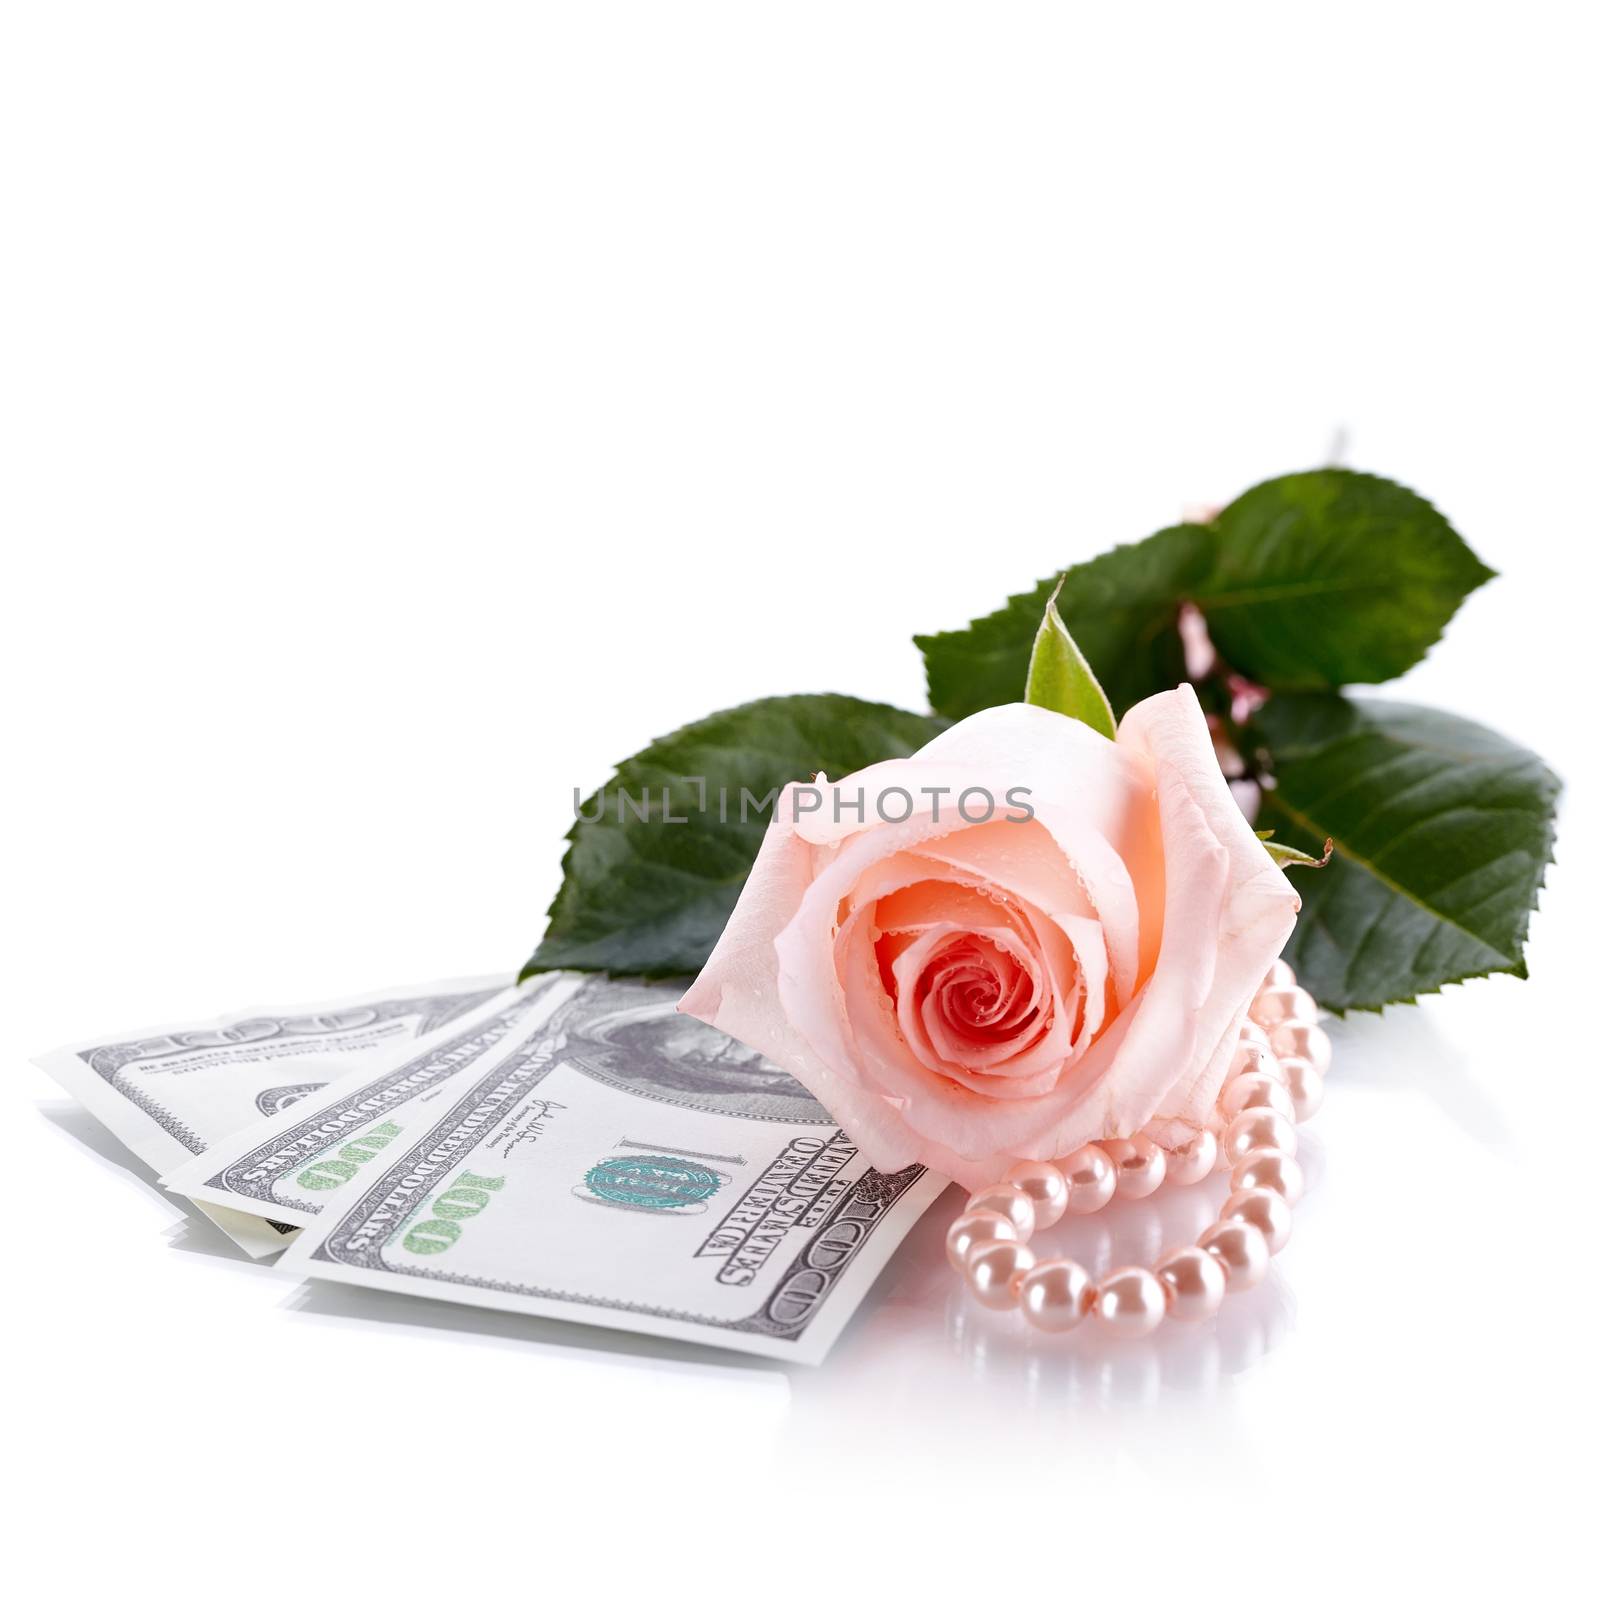 Pink rose. Pink flower. Rose and dollars and pearl beads. Dollars. Flowers and money and pearl beads. Expensive flower. Expensive gift. Pink rose flower and money